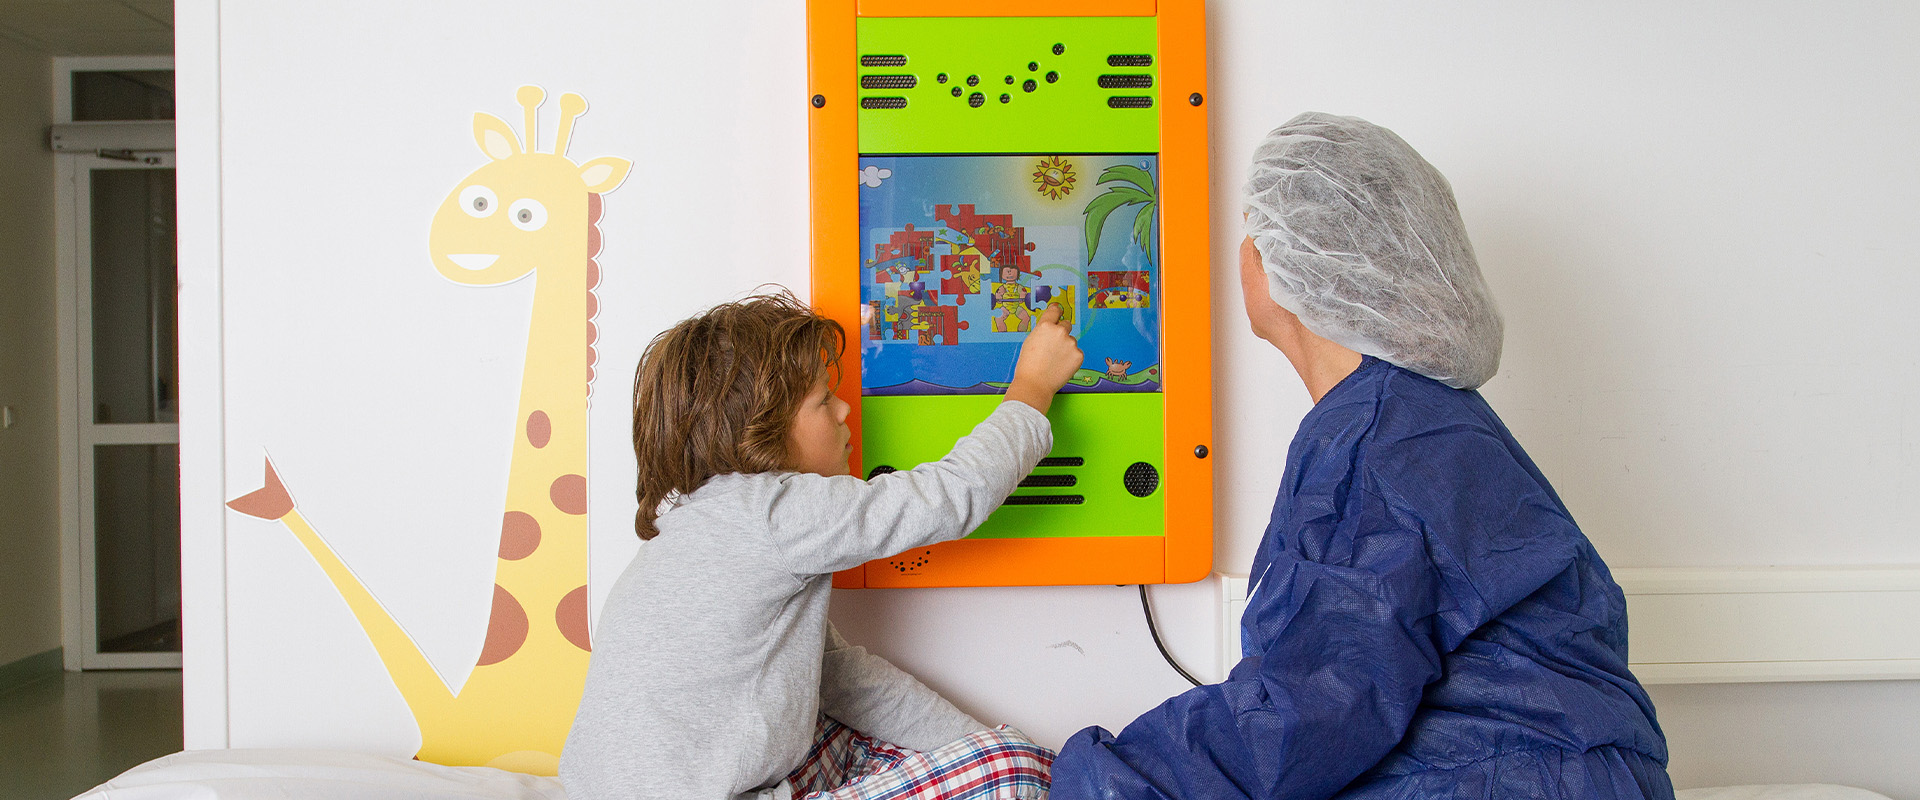 Wall game for children in hospital